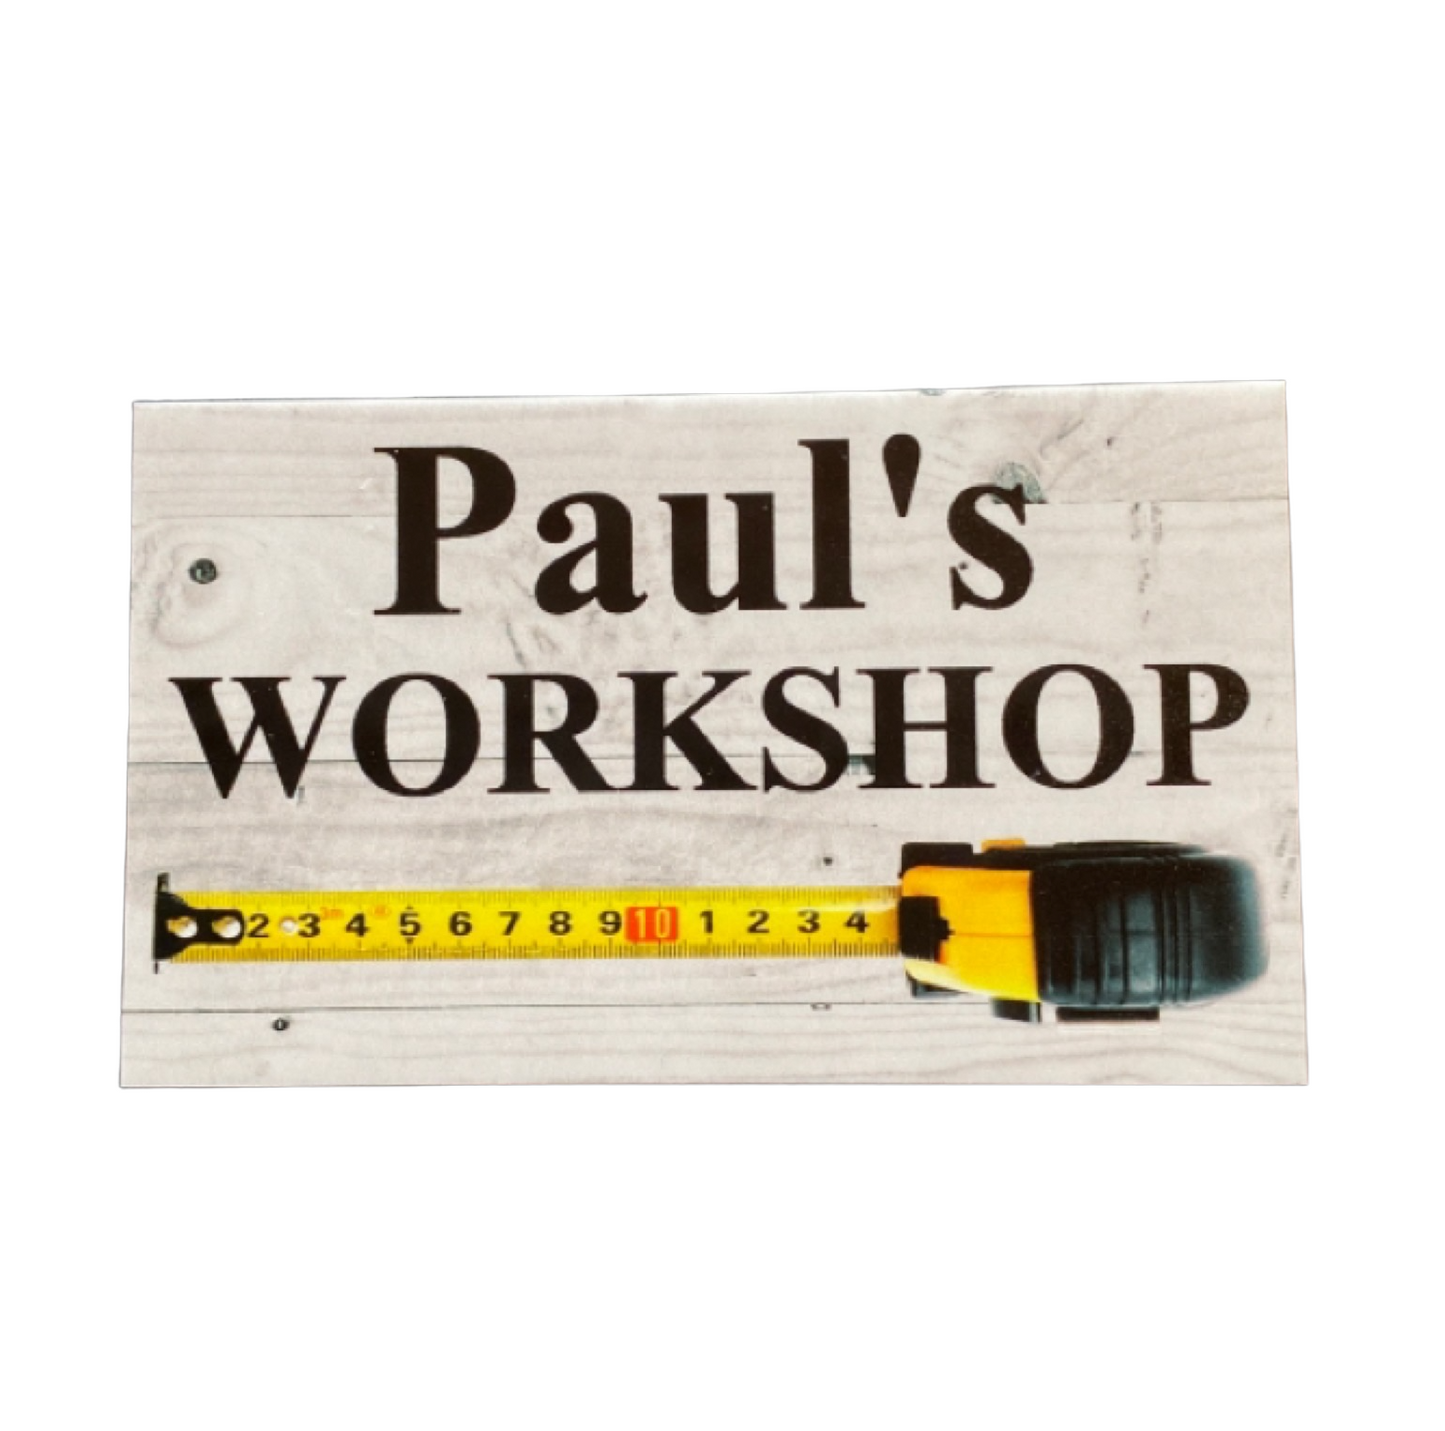 Workshop Custom Personalised Garage Shed Sign - The Renmy Store Homewares & Gifts 